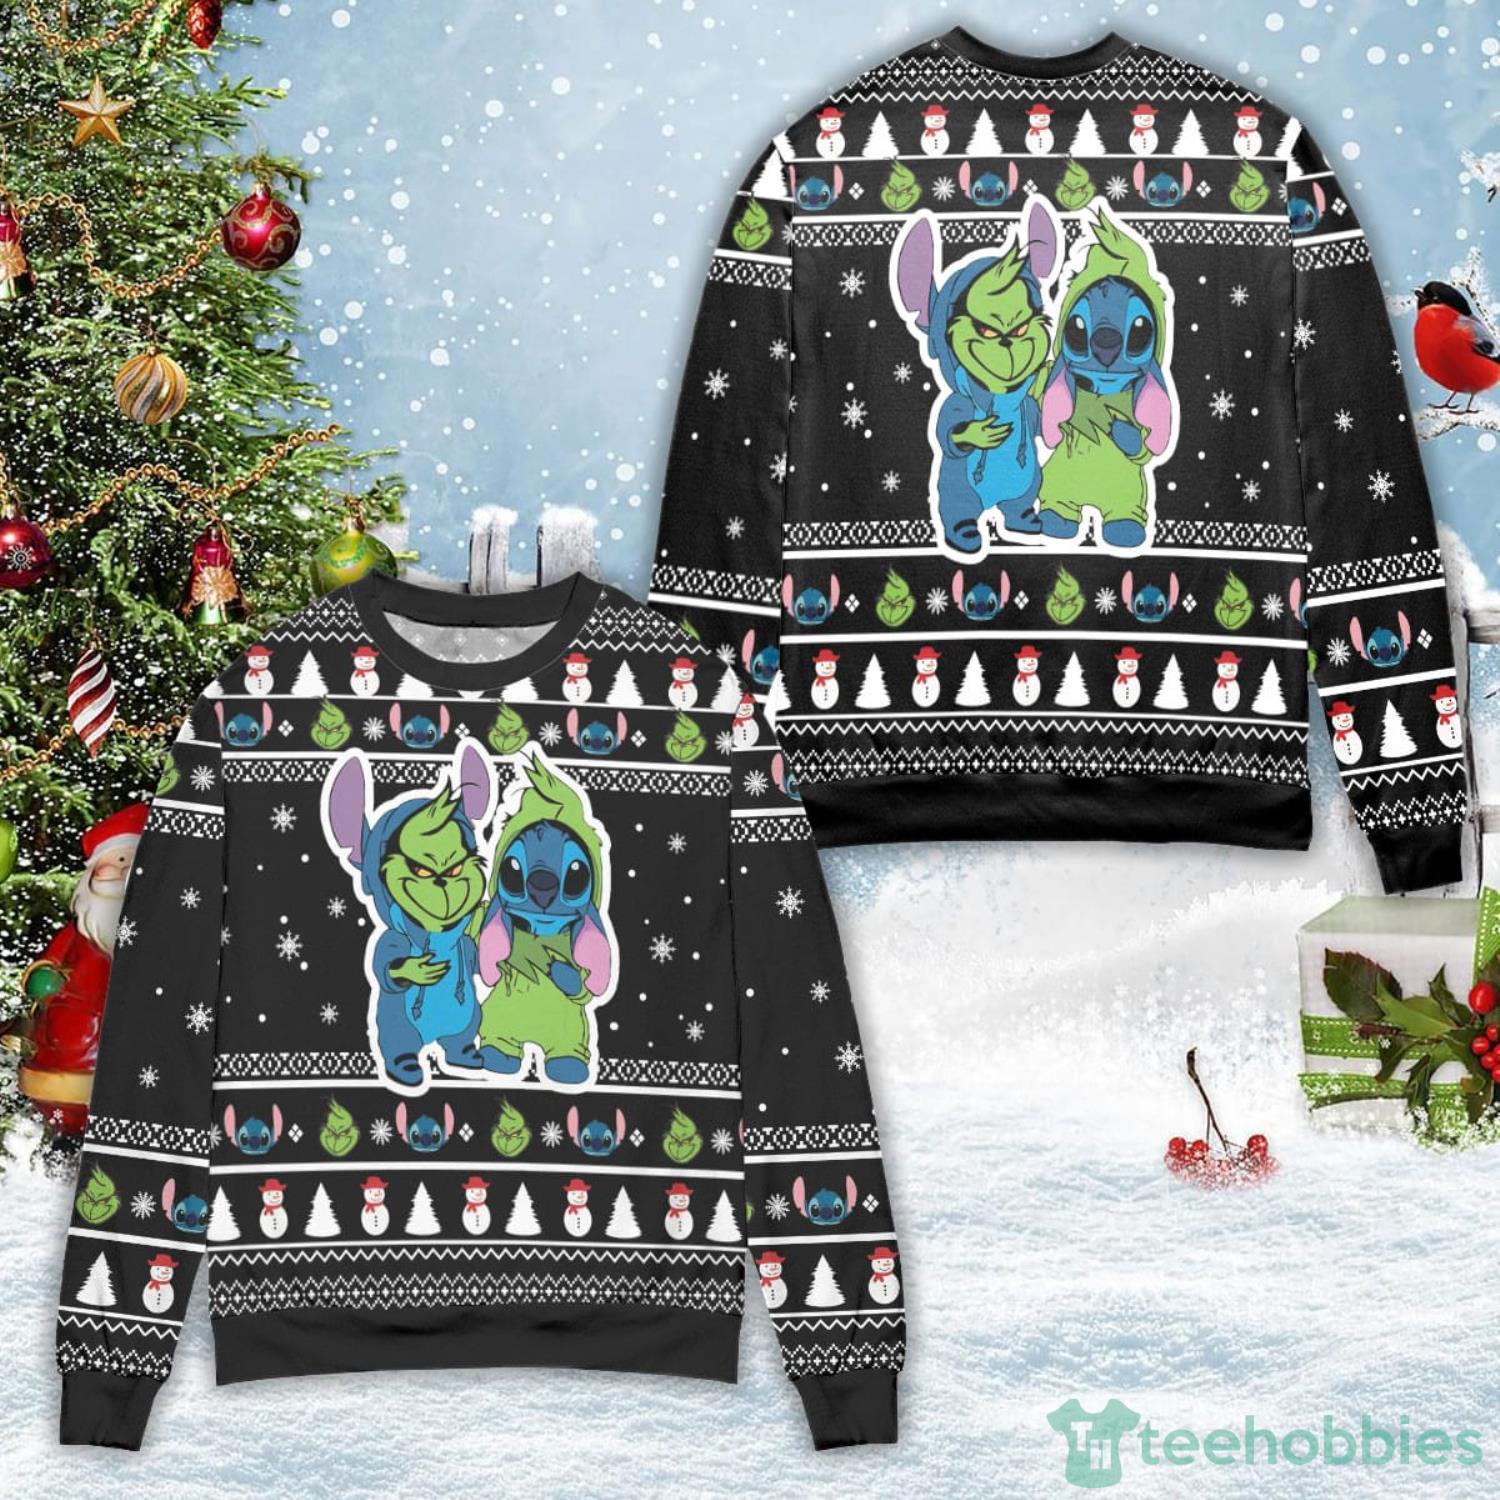 The Grinch Christmas Decorations , Stitch Christmas Garland